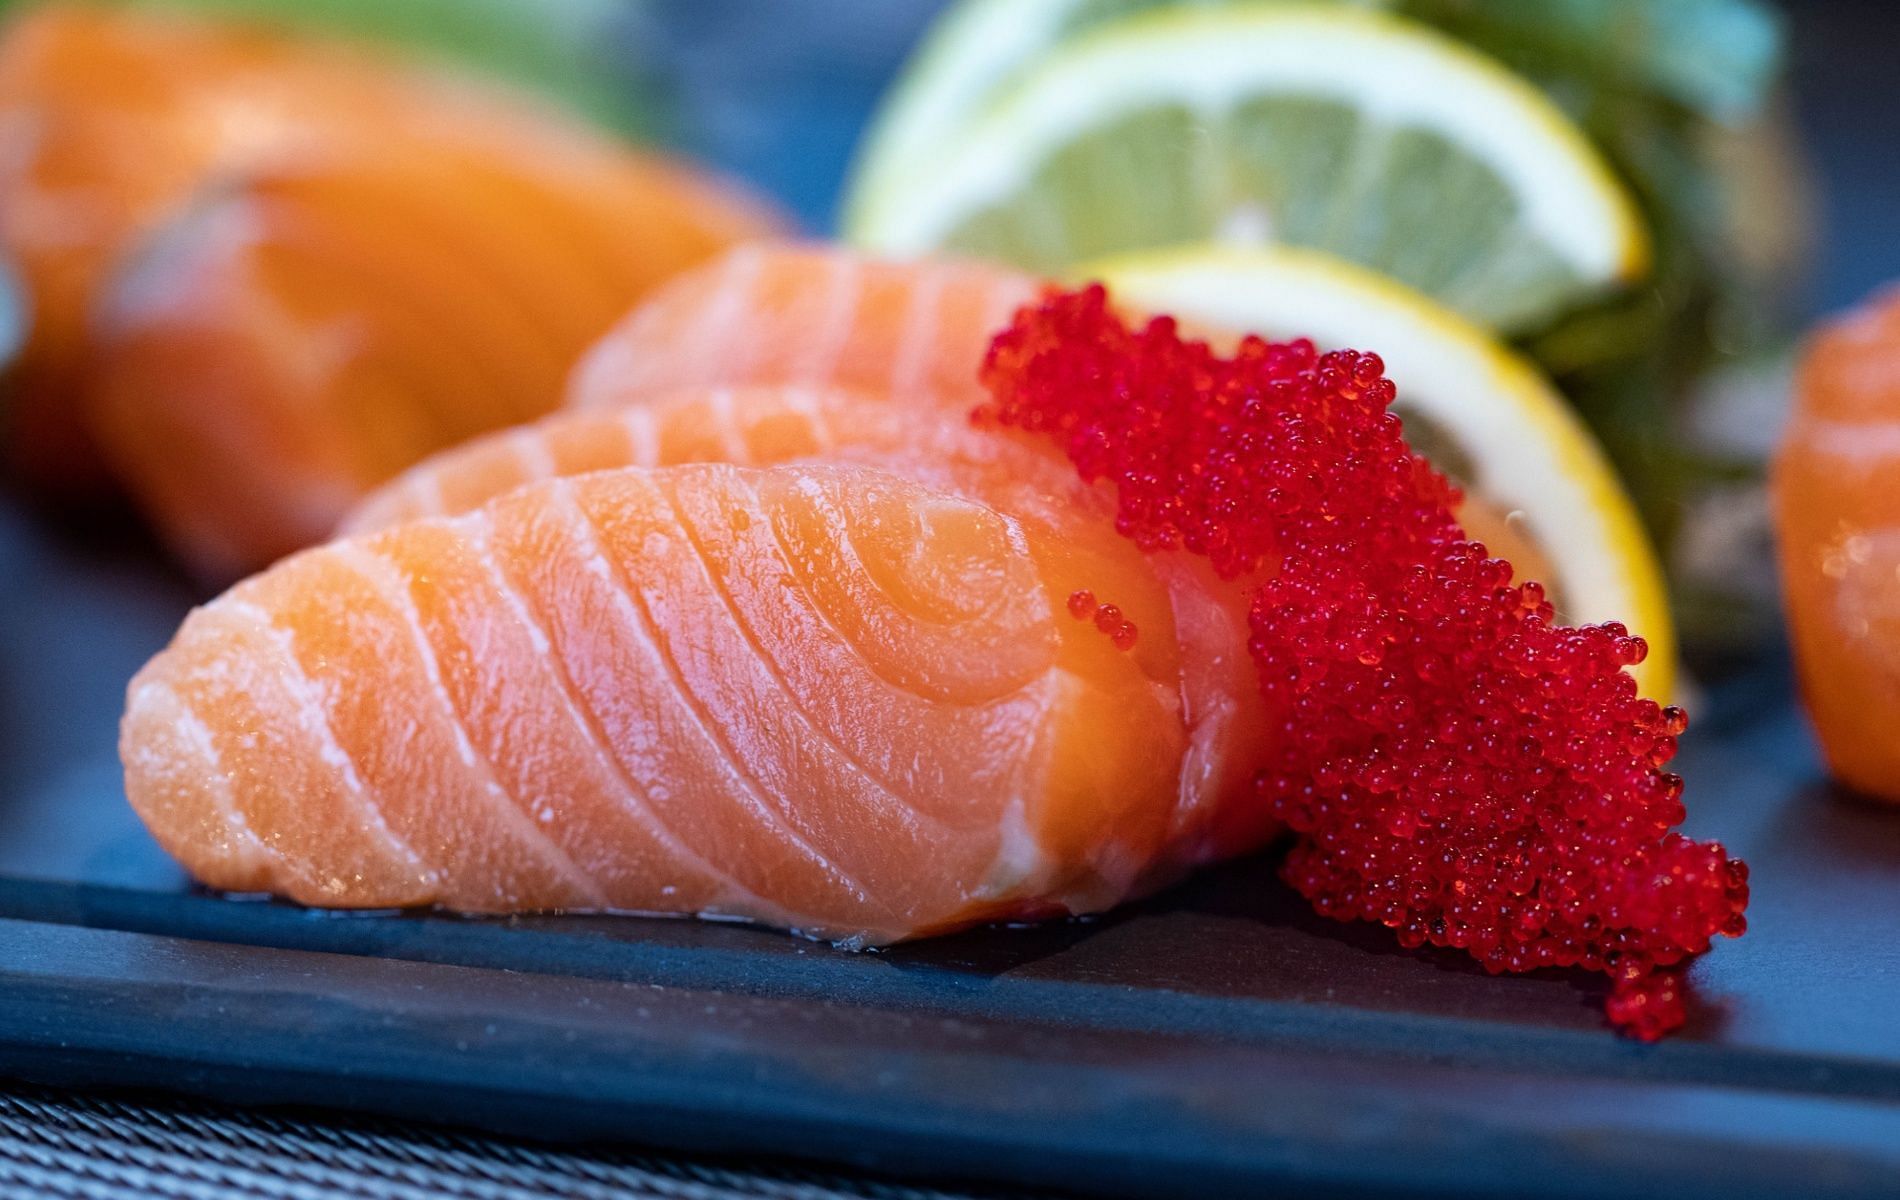 Salmon is a greatly-consumed oily fish that&#039;s rich in Omega-3 fatty acids (Image by Valeria Boltneva via Pexels)